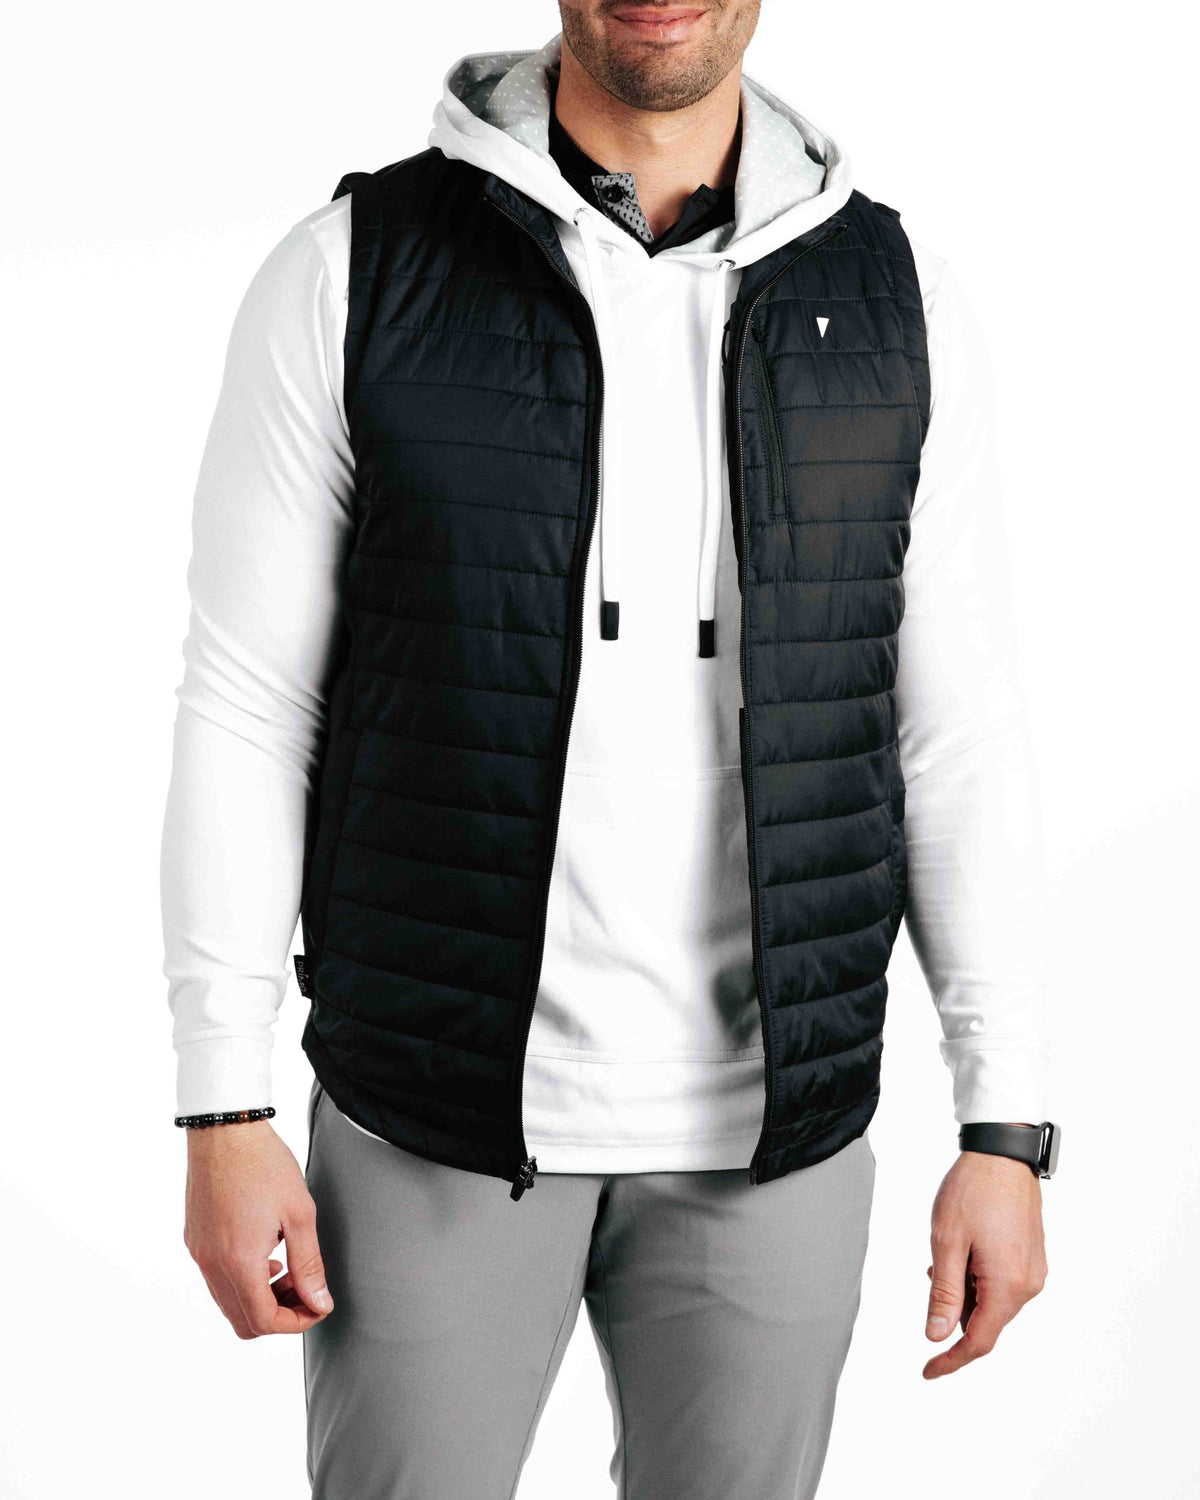 The Primo Golf Black Vest open with Hoodie